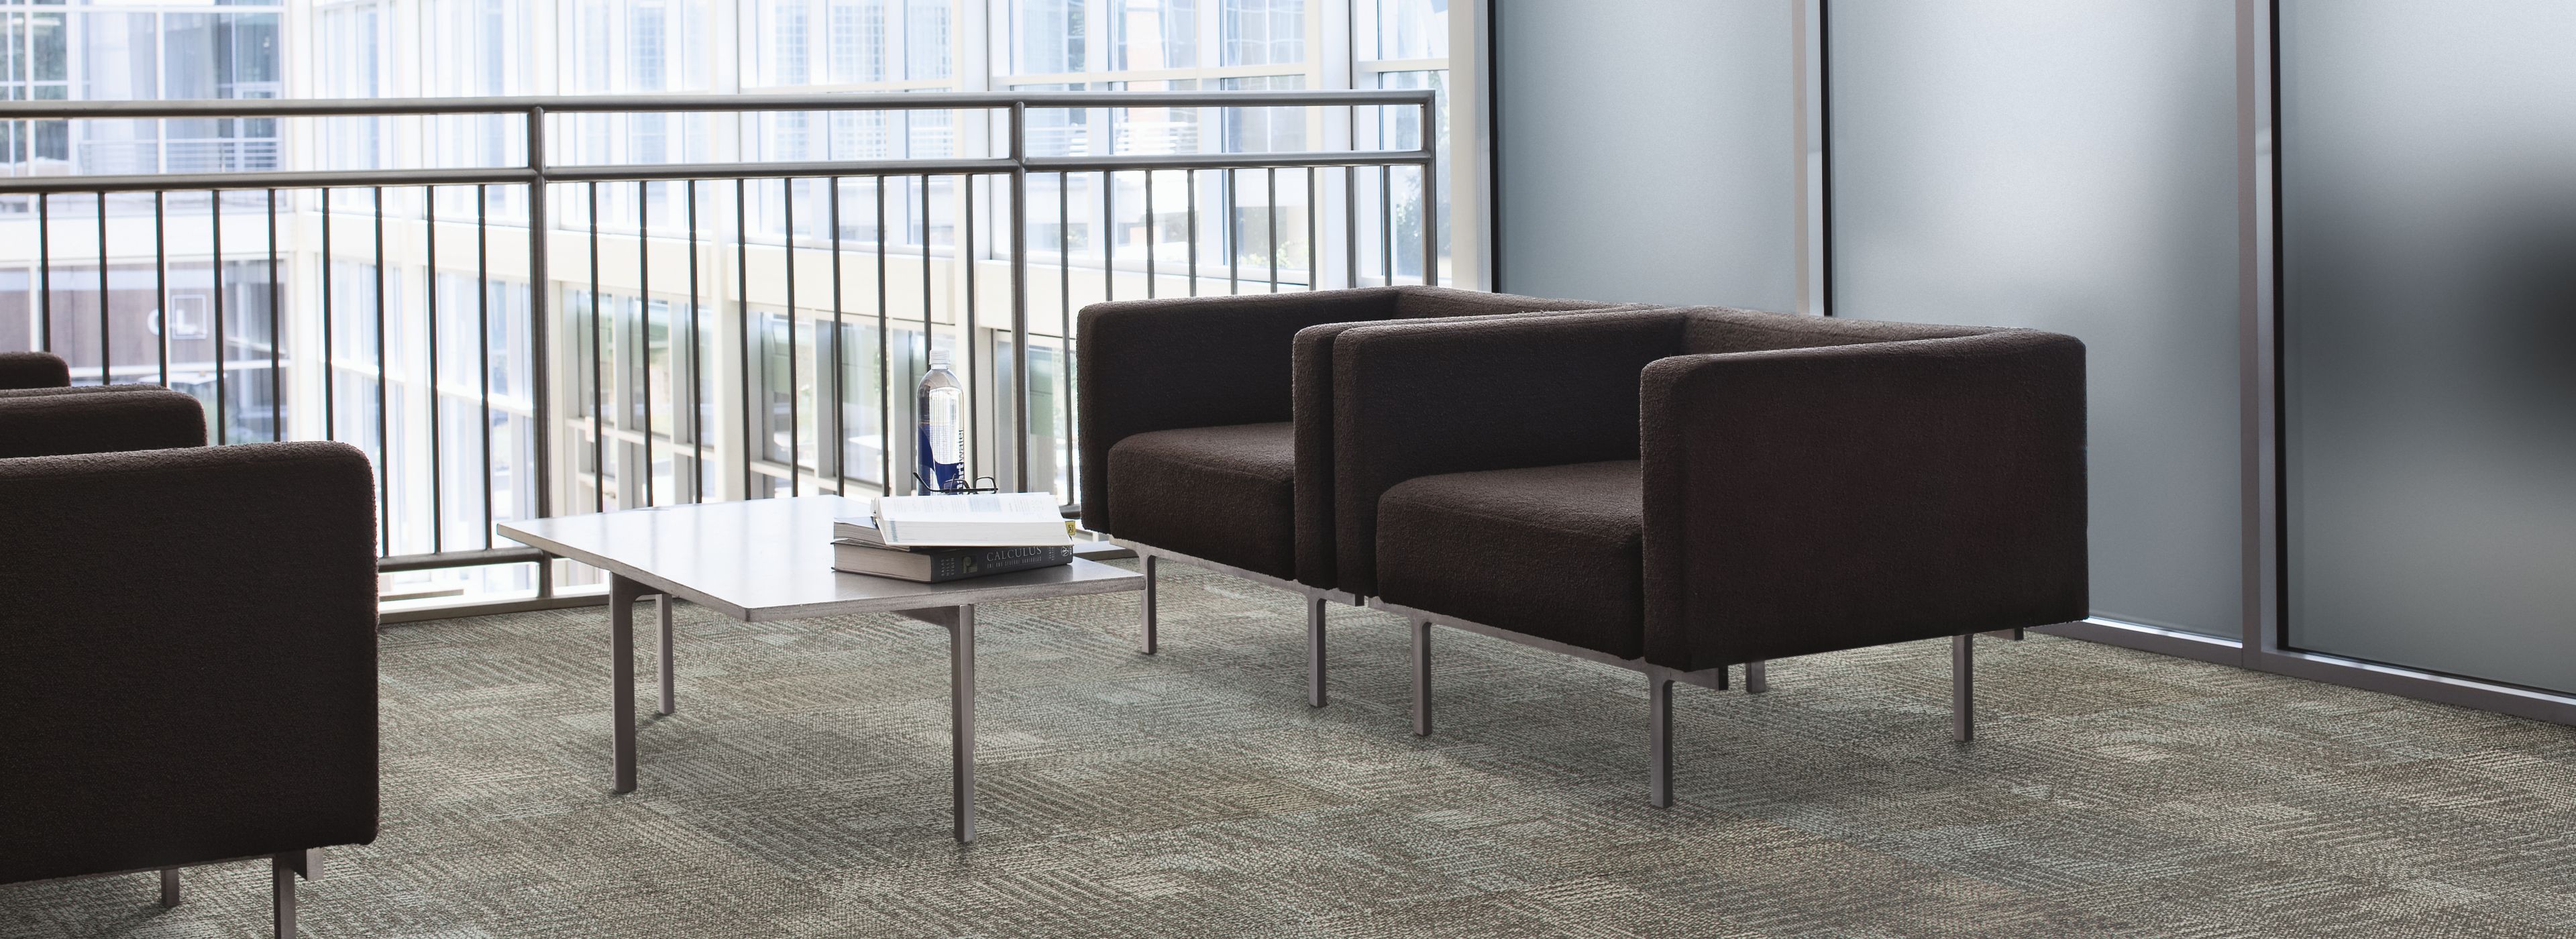 Interface Work carpet tile in lobby setting with couch and chairs imagen número 1